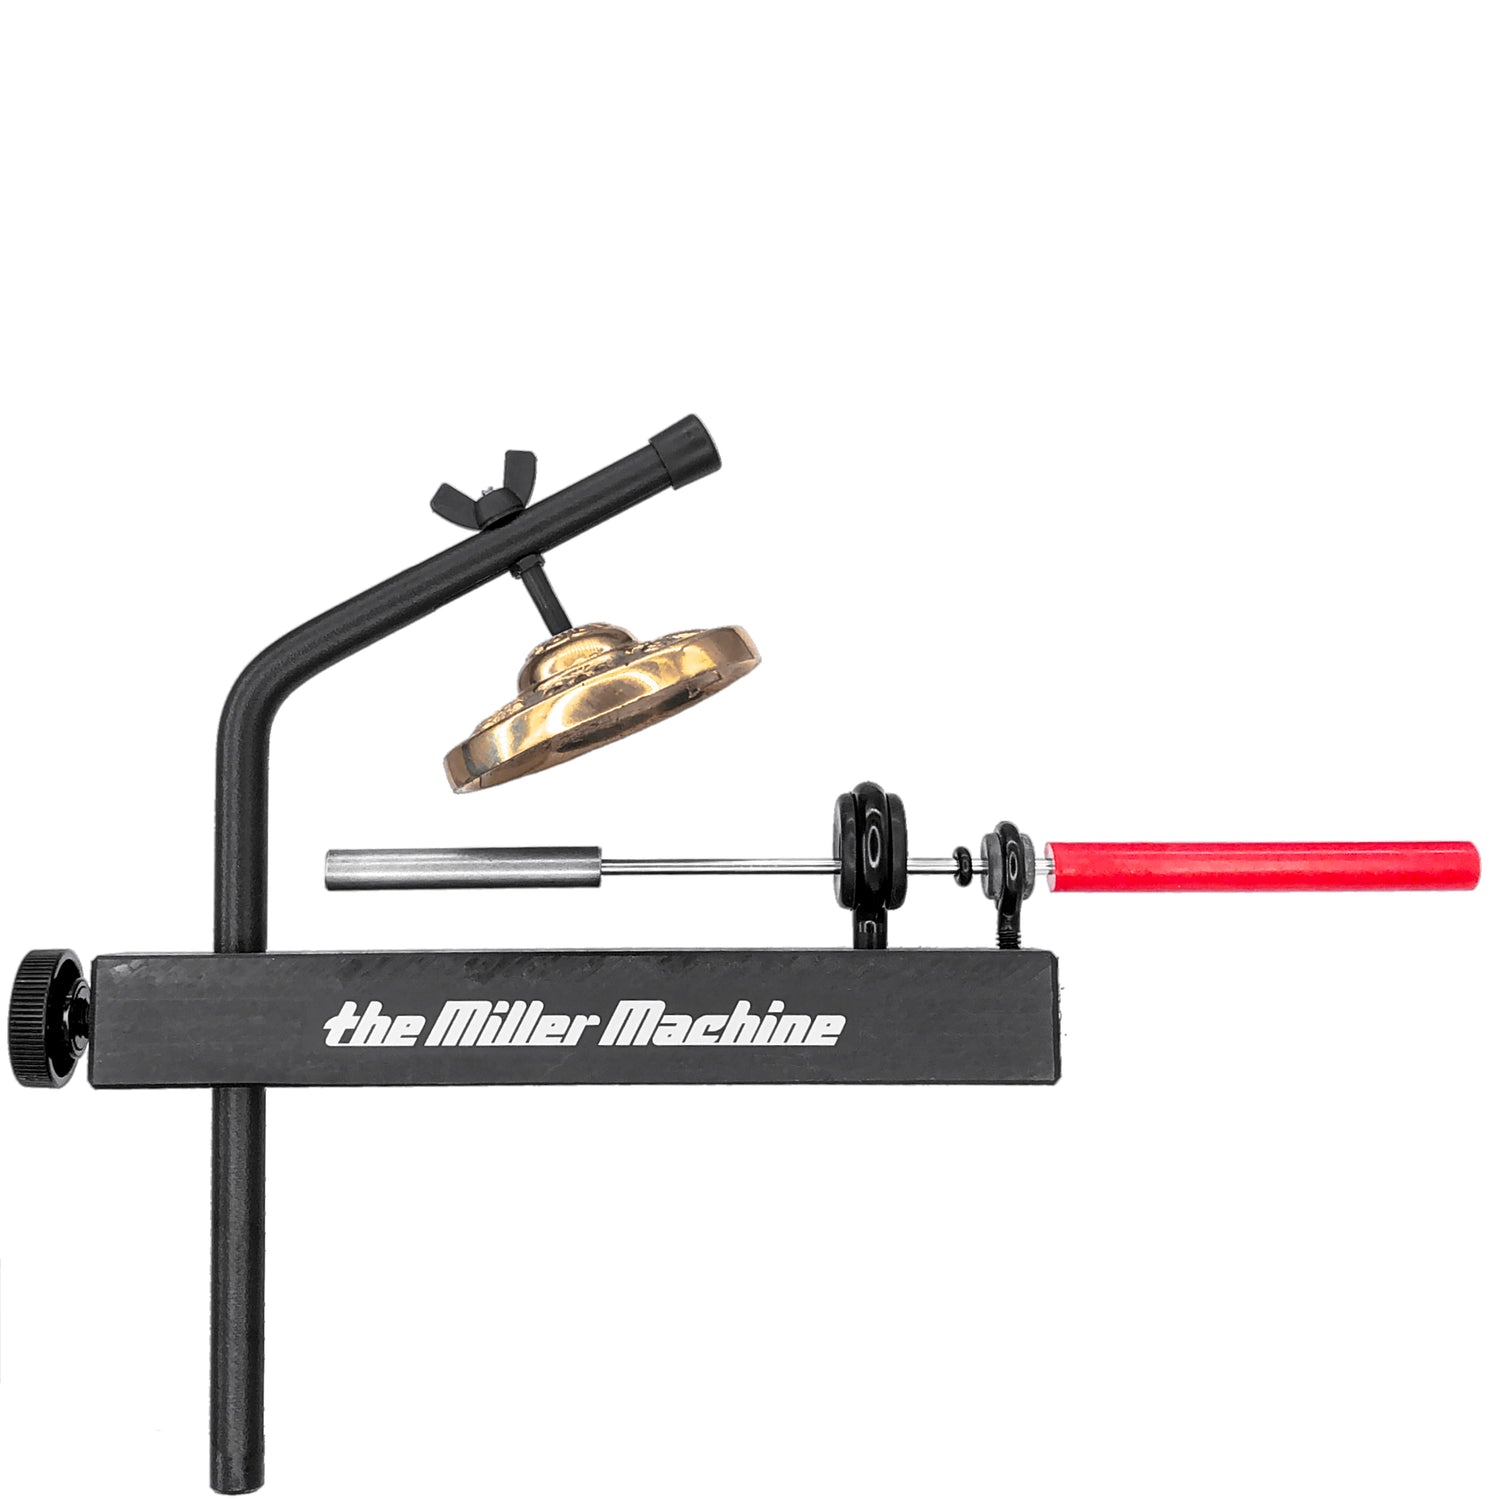 Photo of Finger Cymbal Machine by The Miller Machine which includes the new Adjustable Arm and new Solid Body Steel Beater.